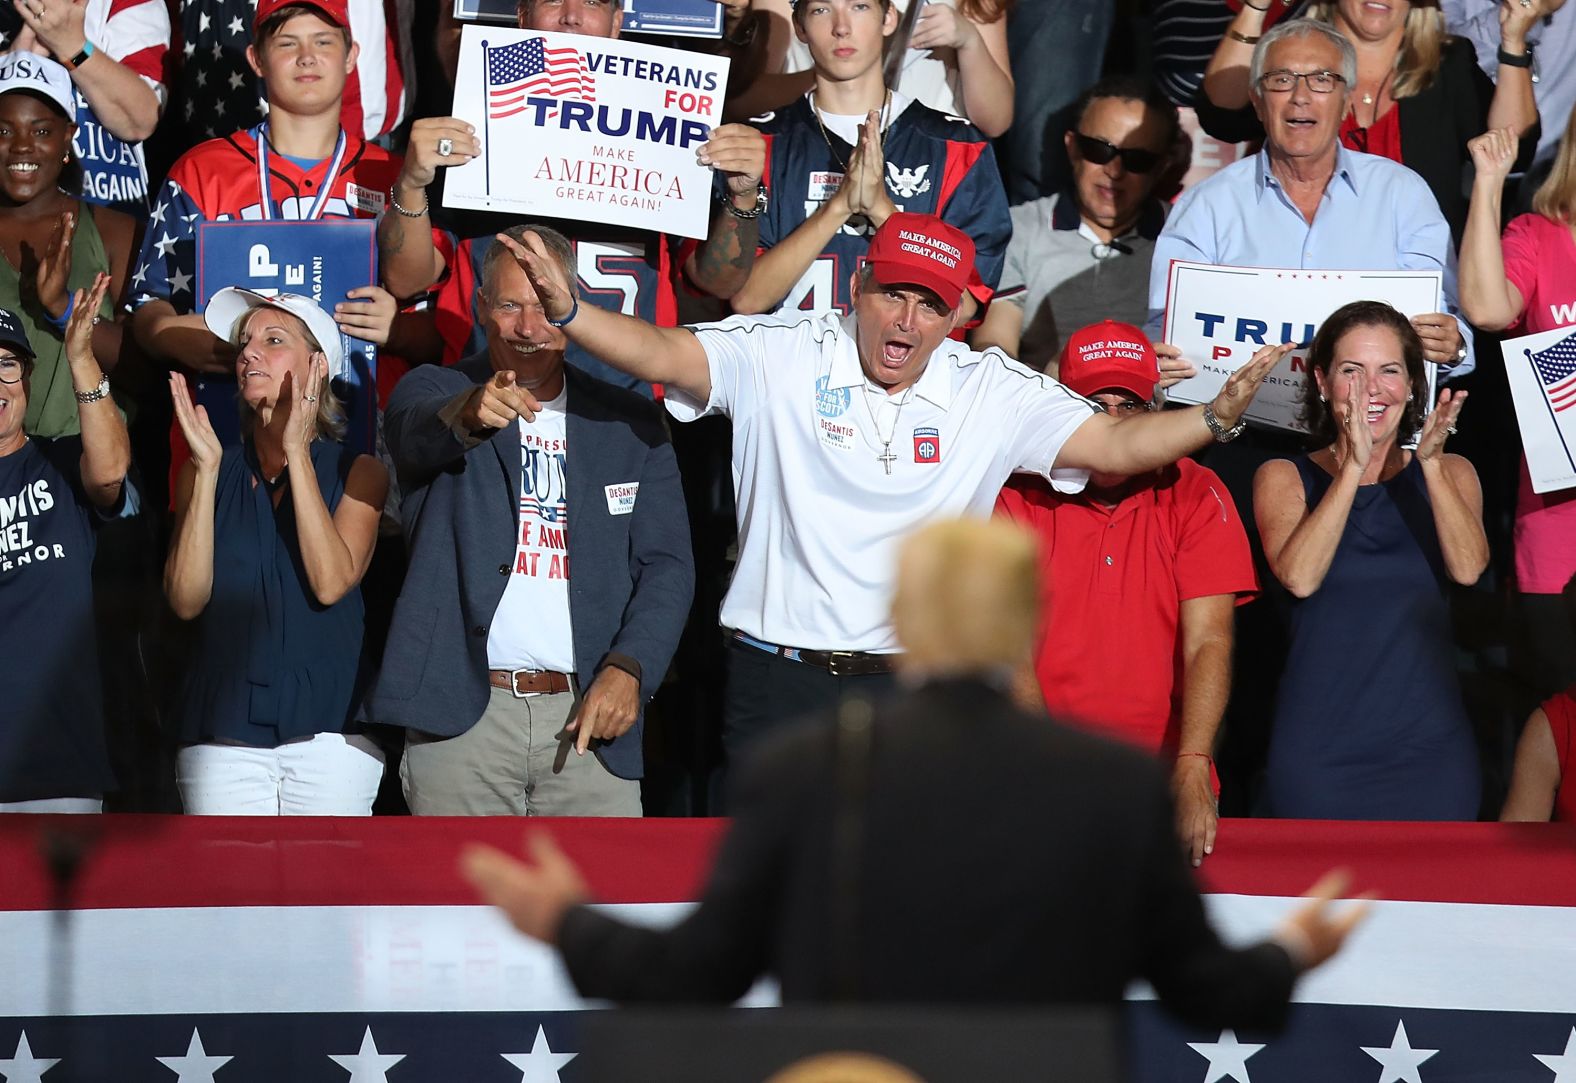 People cheer as President Trump looks at them during a campaign rally in Estero, Florida, on October 31. Trump traveled across the country to help get out the vote for Republican candidates running in <a href="https://www.cnn.com/2018/11/05/politics/gallery/america-votes-2018/index.html" target="_blank">the midterm elections.</a>